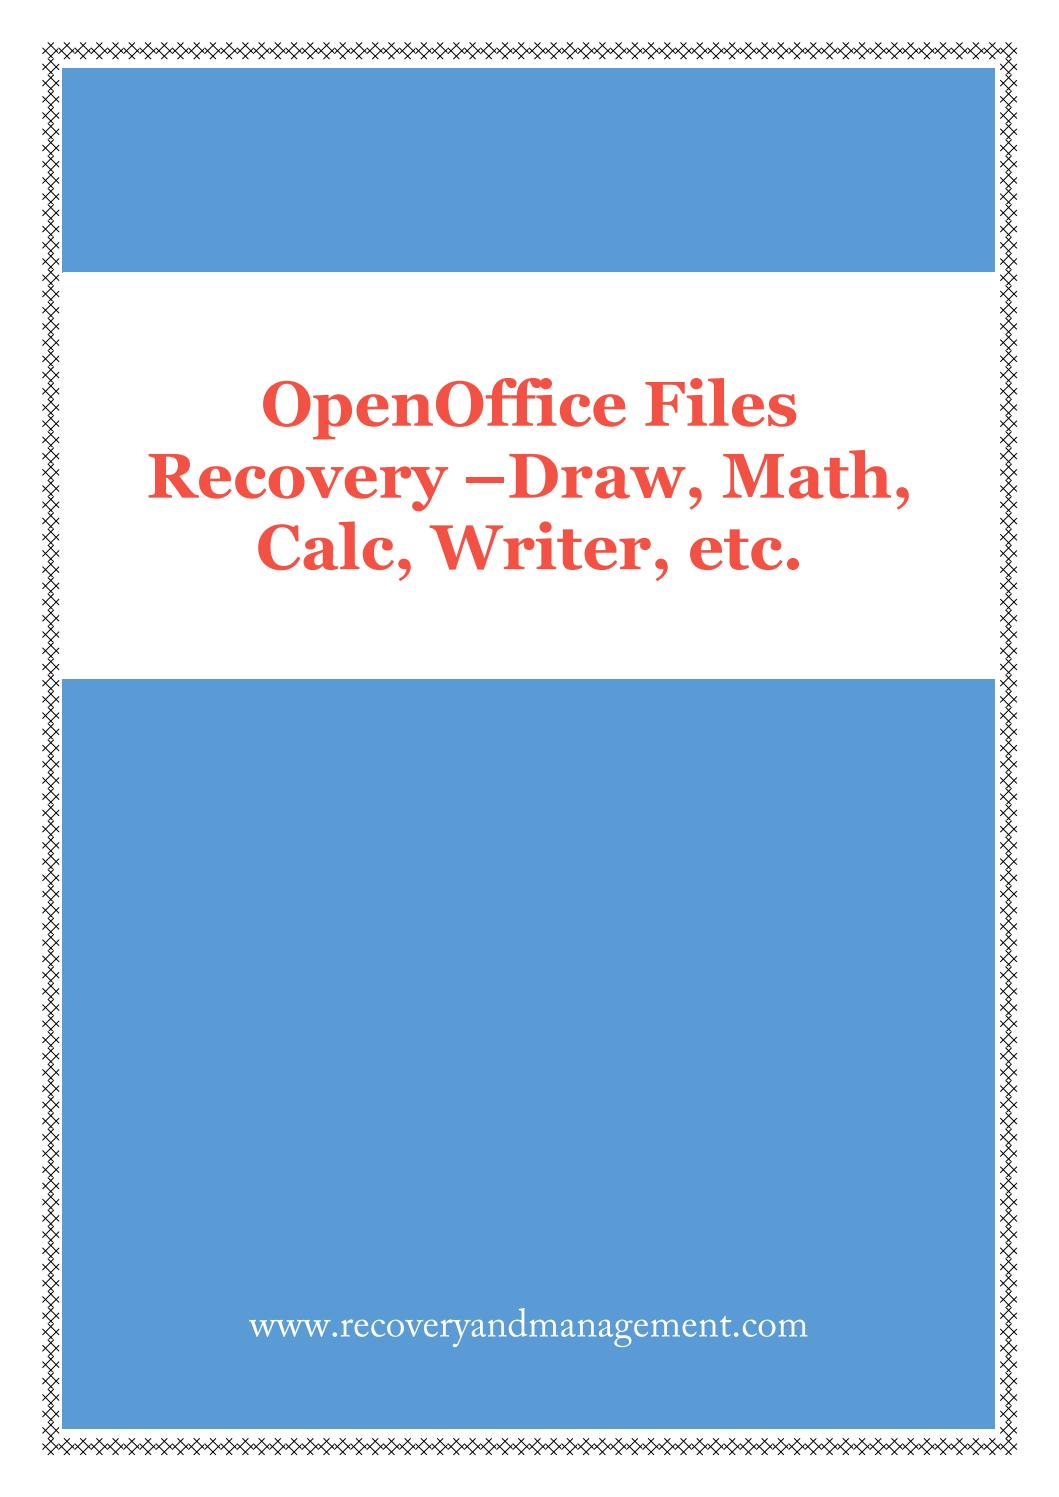 Openoffice Spreadsheet Recovery Within Openoffice Recovery Software: Math, Calc, Impress, Draw, Writer